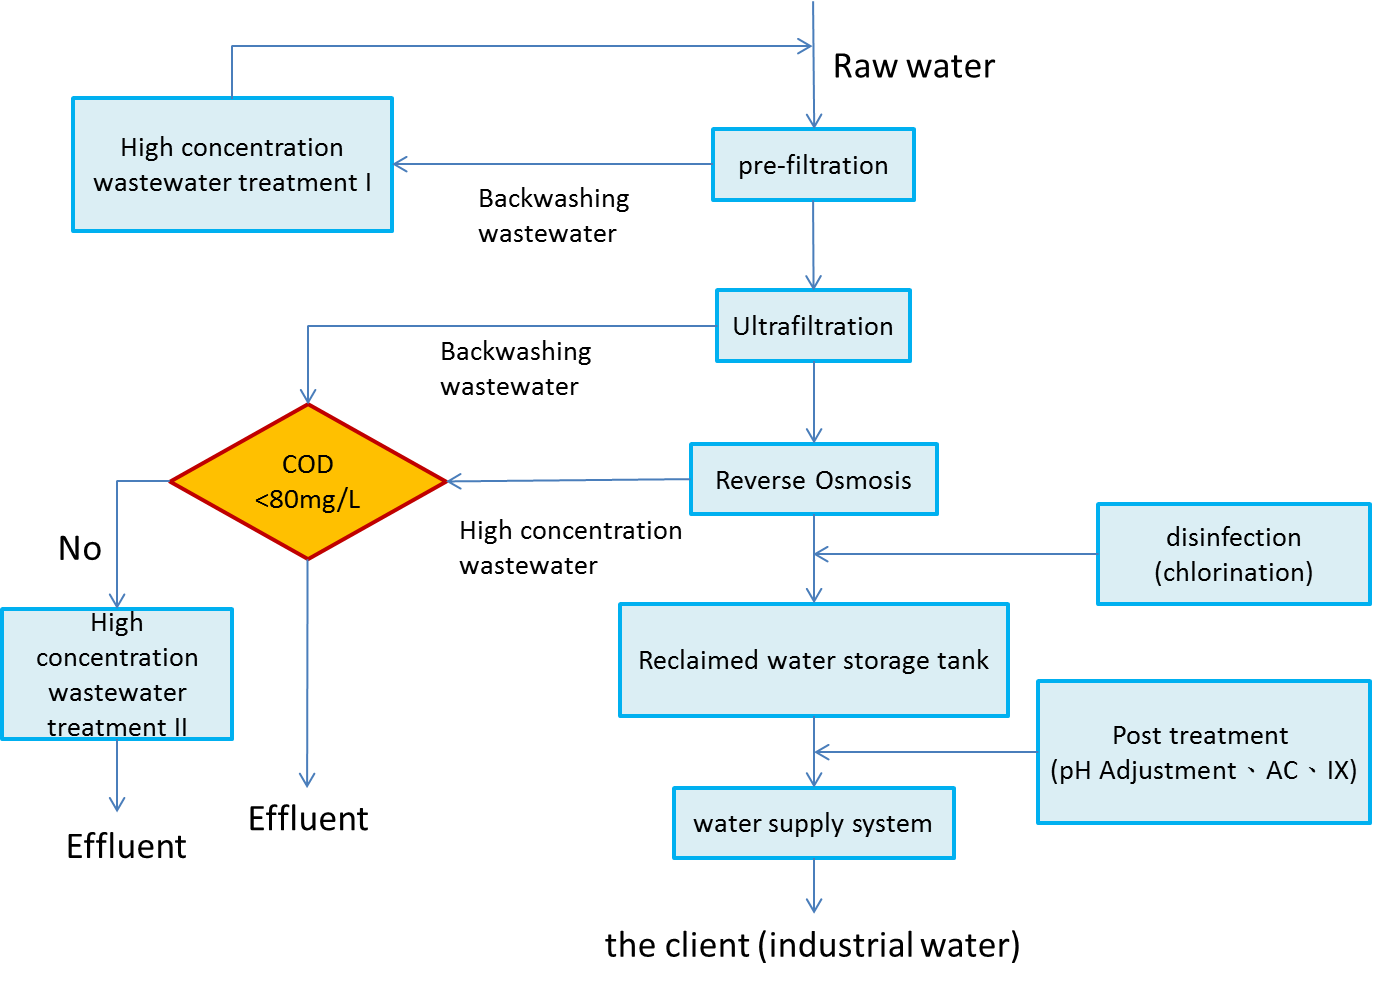 Figure.1 Reclaimed water plant treatment planning flow chart